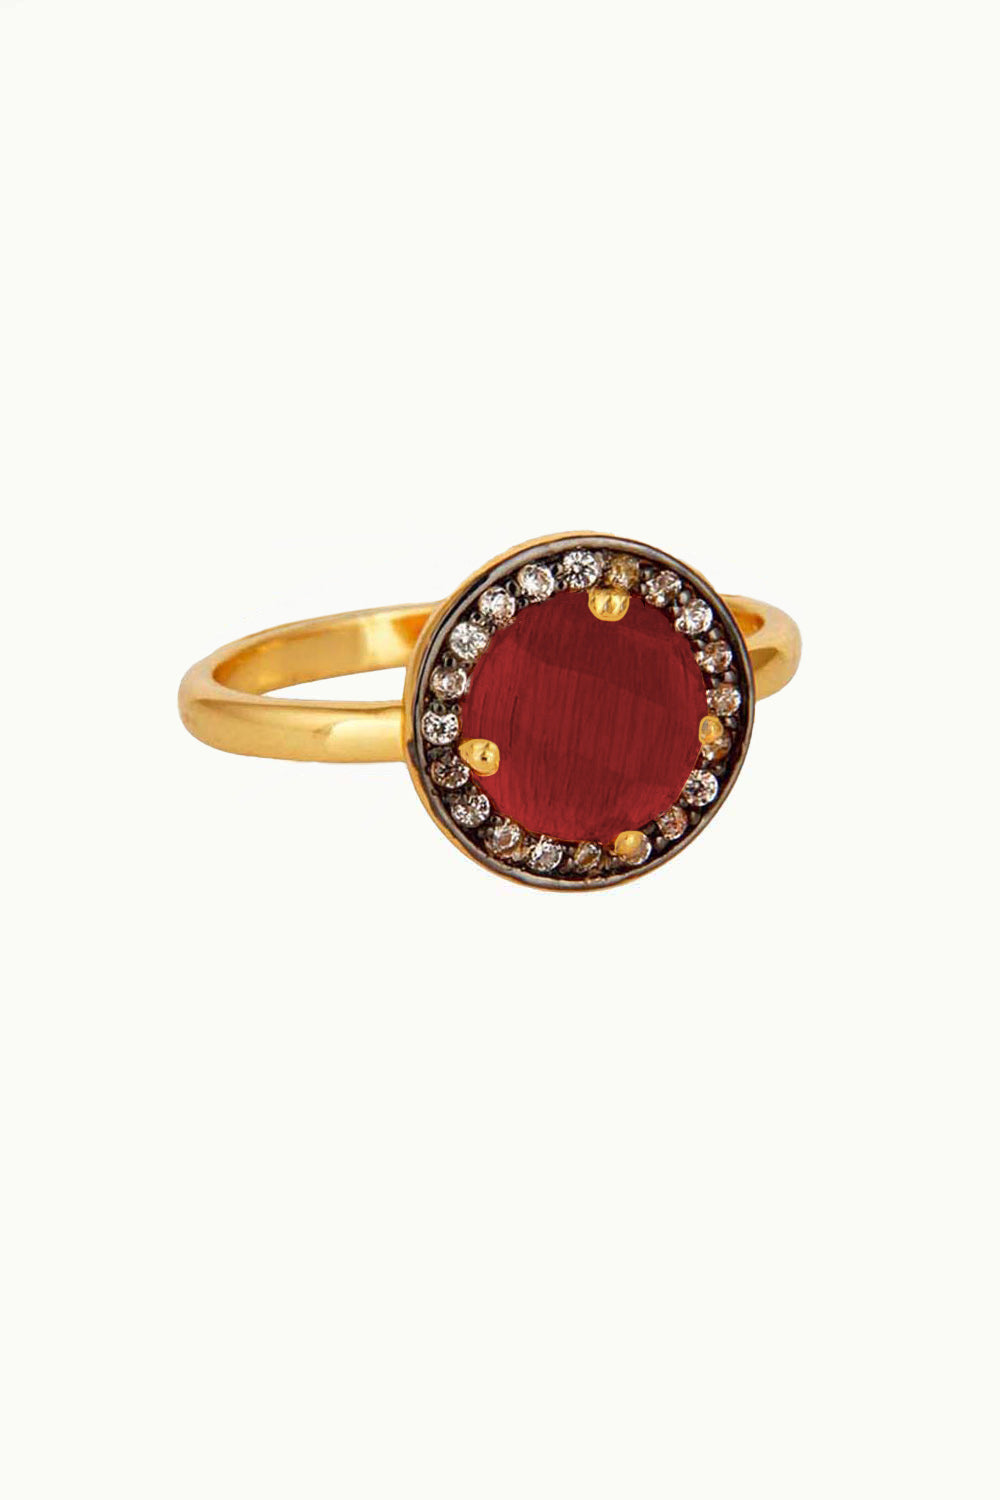 Sivalya Red Onyx Gold Vermeil Ring - Halo